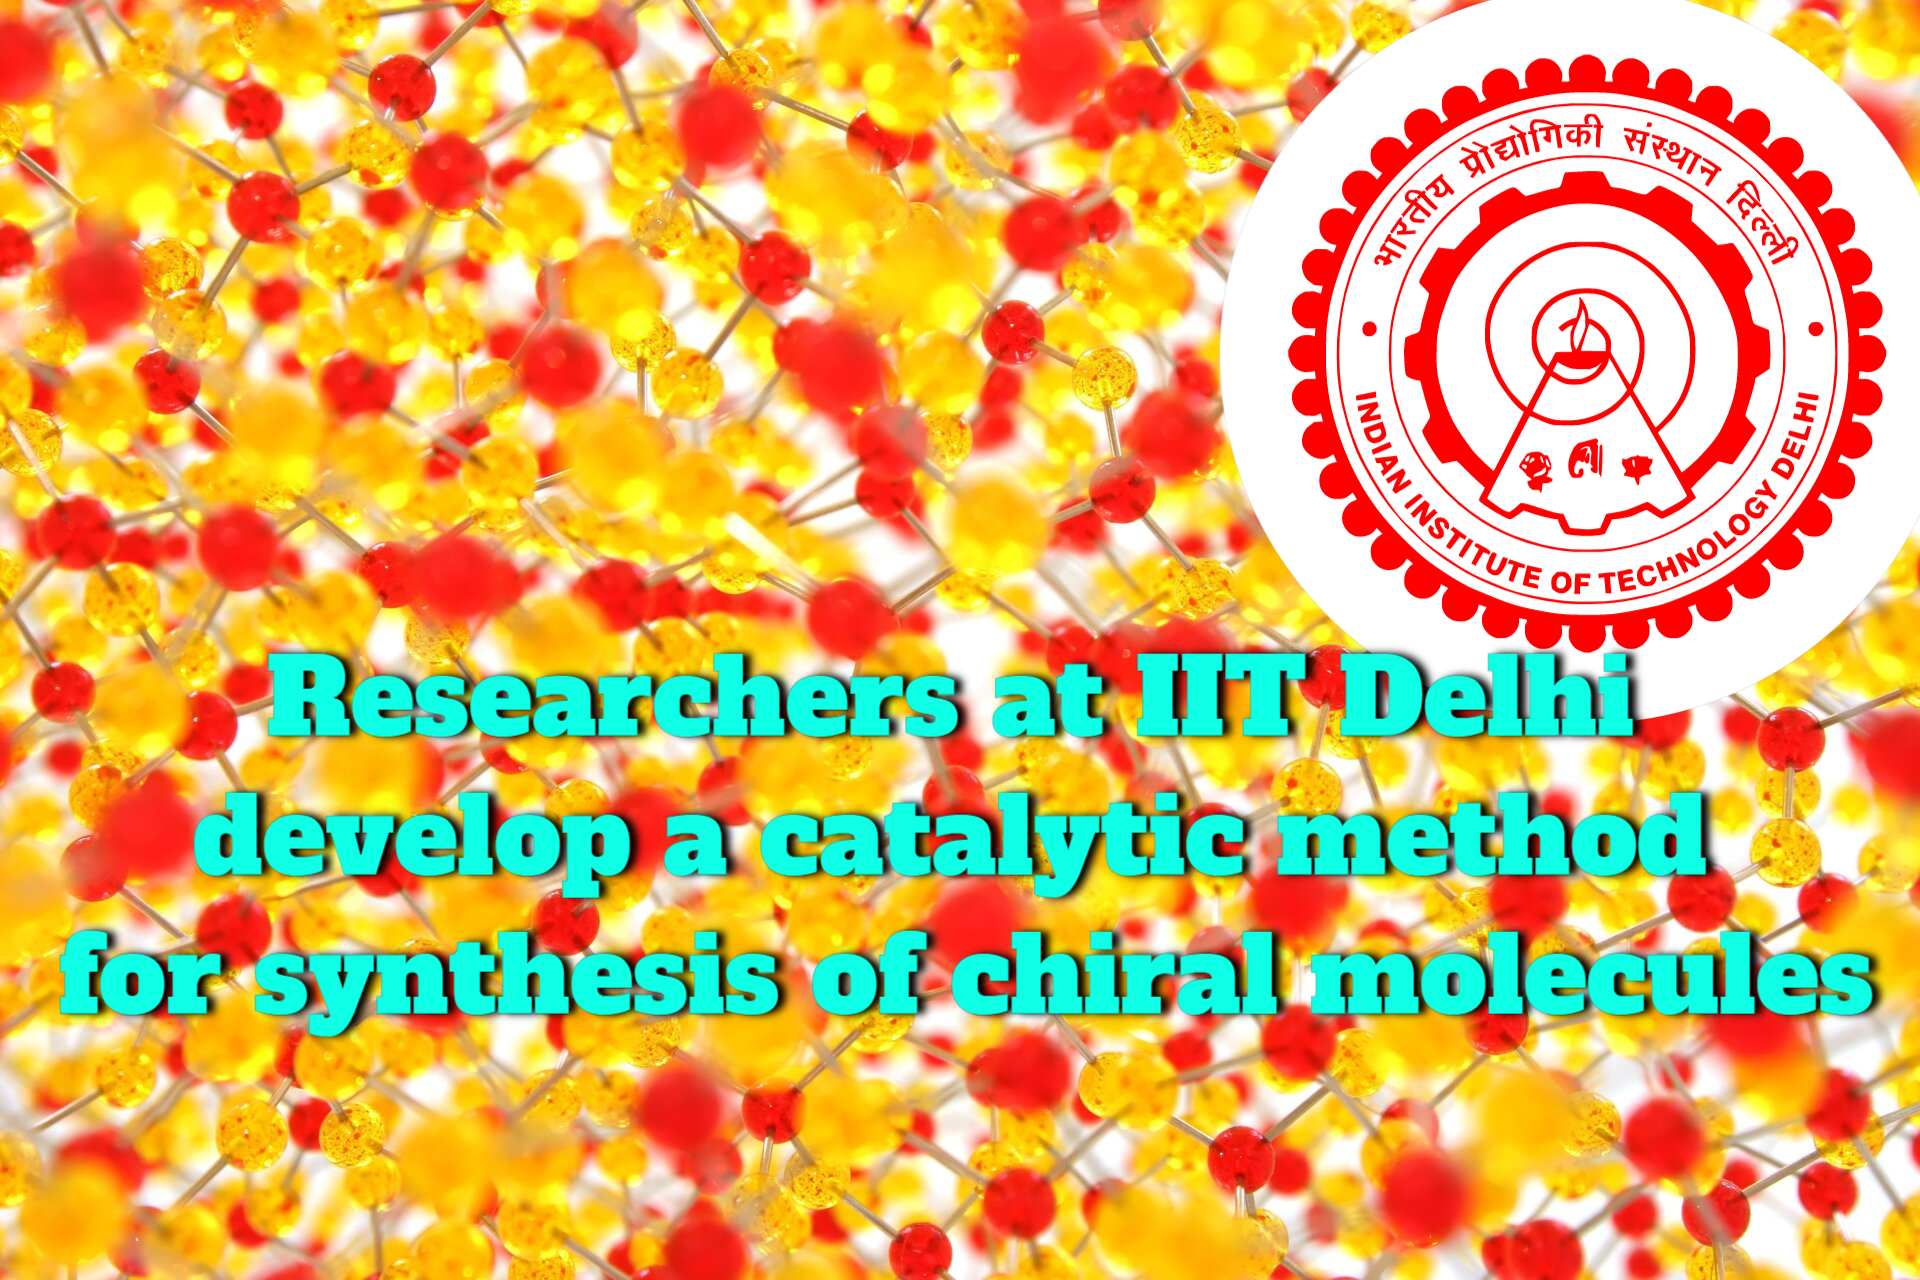 Research Team At IIT Delhi Develops Catalytic Technology For Synthesis Of Chiral Molecules